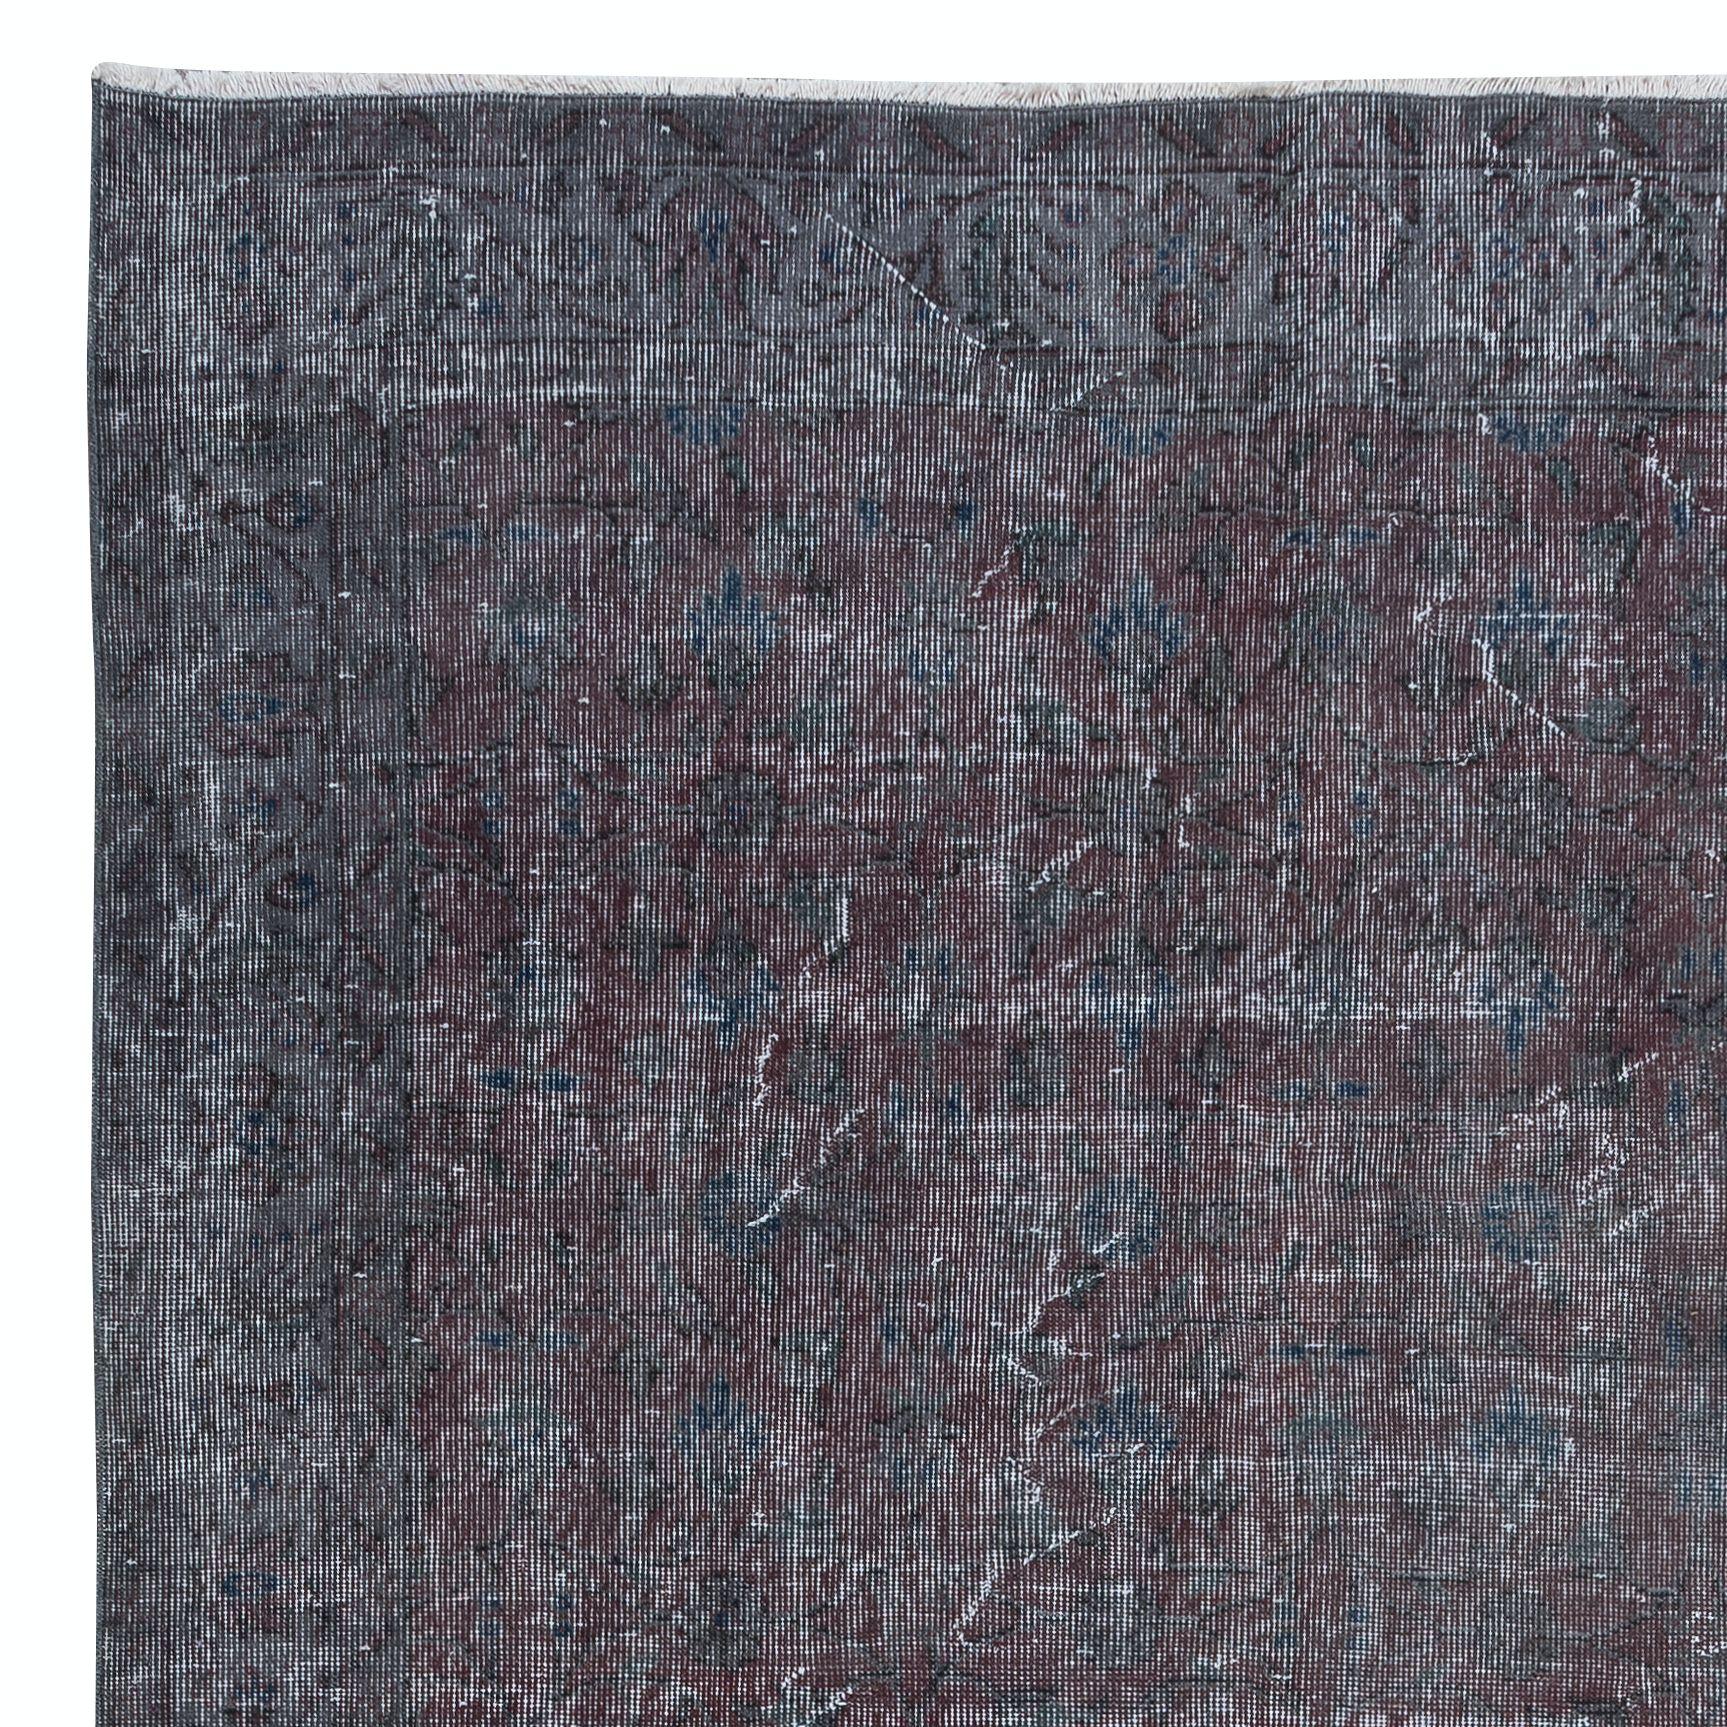 Hand-Woven 6x9.3 Ft Distressed Handmade Rug in Gray & Faded Red, Ideal for Modern Interiors For Sale